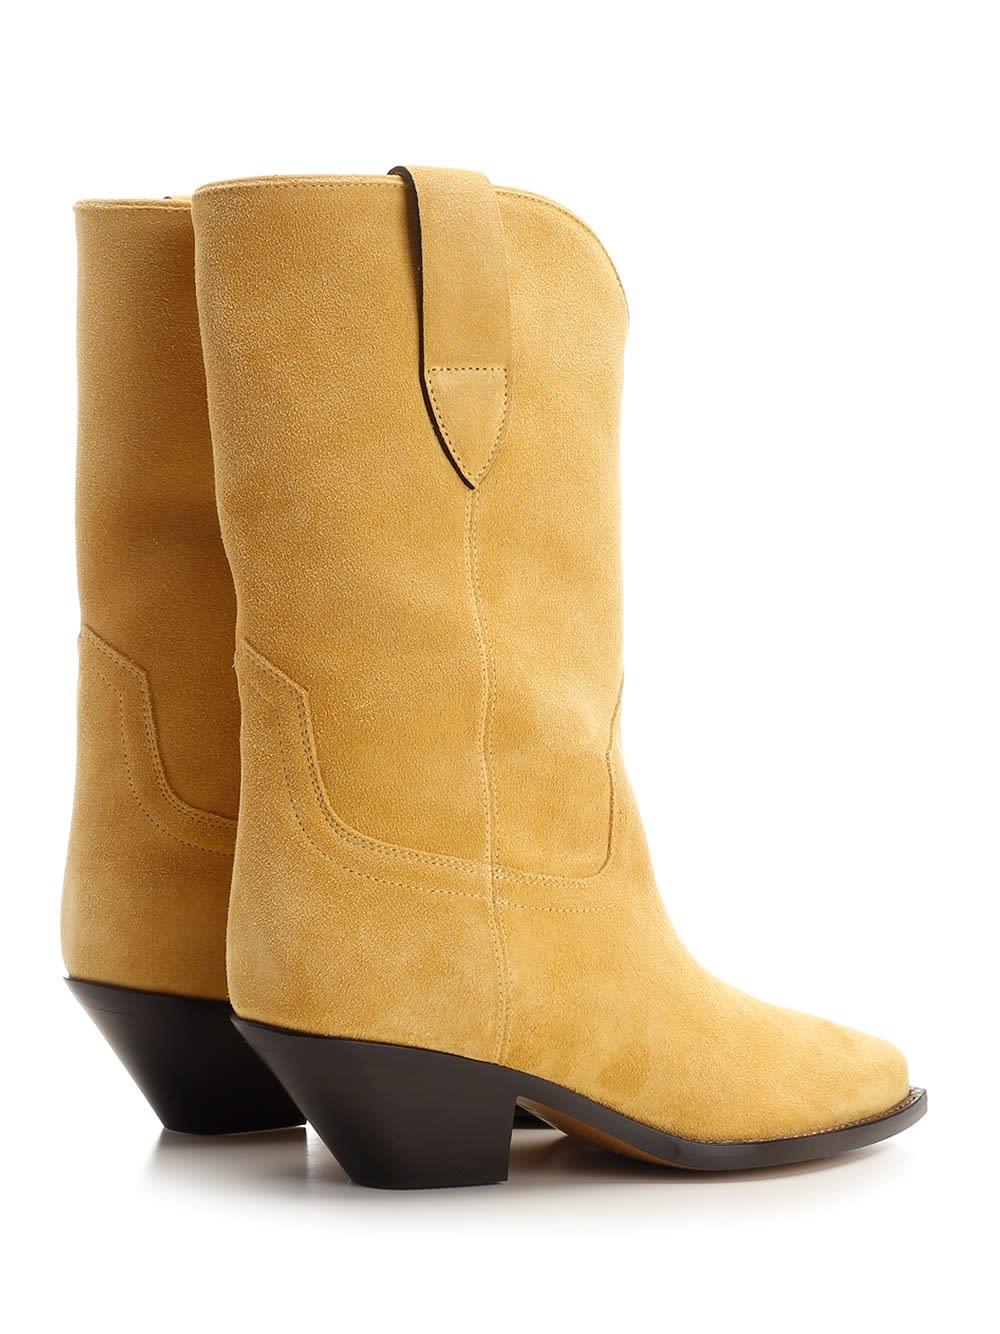 Isabel Marant Dahope Suede Boots in Yellow | Lyst